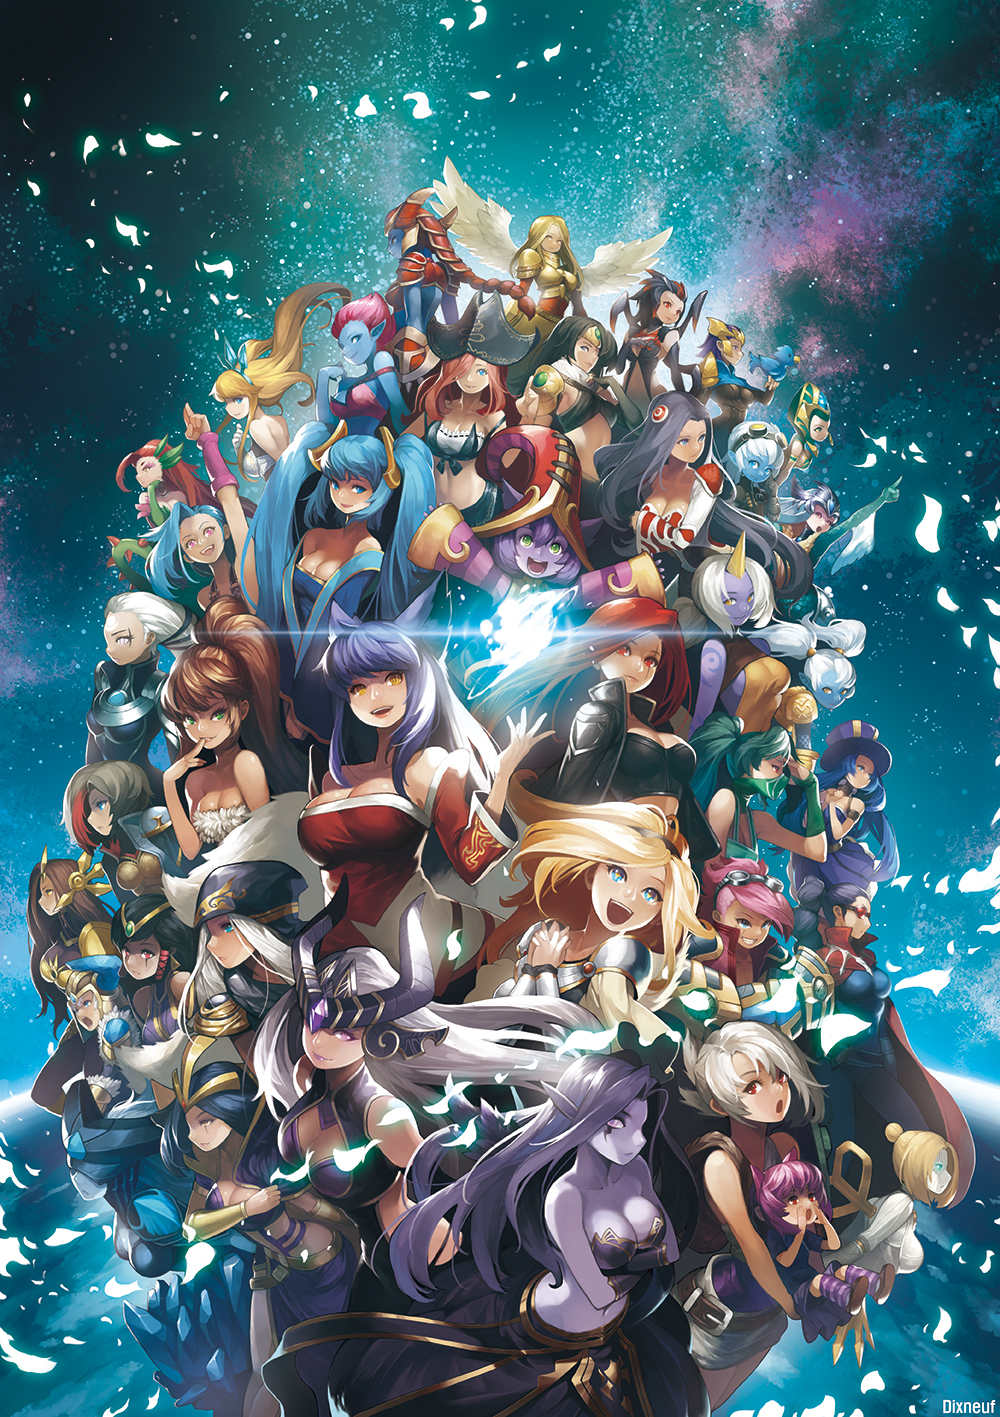 ahri akali android angel_wings animal_ears annie_hastur armor arms_up ashe_(league_of_legends) belt bird black_hair blonde_hair blue_eyes blue_hair blue_skin bracer breasts brown_eyes buckler caitlyn_(league_of_legends) cassiopeia_du_couteau cleavage crop_top crossed_arms diana_(league_of_legends) dragon_girl dress eirashard elise_(league_of_legends) emilia_leblanc evelynn everyone face_mask finger_to_chin finger_to_mouth fiora_laurent flat_chest fox_ears fox_tail fur_trim goggles green_eyes hair_ornament halter_top halterneck hands_clasped hat head_fins helmet highres hood horn insect_girl irelia janna_windforce jinx_(league_of_legends) karma_(league_of_legends) katarina_du_couteau kayle lamia large_breasts league_of_legends lens_flare leona_(league_of_legends) lissandra long_hair lulu_(league_of_legends) luxanna_crownguard mask mermaid monster_girl morgana multiple_girls nami_(league_of_legends) nidalee open_mouth orianna_reveck own_hands_together pink_eyes pink_hair pirate_hat pointing pointy_ears ponytail poppy purple_eyes purple_hair quinn red_eyes red_hair riven_(league_of_legends) sarah_fortune sejuani shading_eyes shauna_vayne shield shoulder_pads shyvana silver_hair sivir skirt smile sona_buvelle soraka space spider_girl star_(sky) sunglasses symbol-shaped_pupils syndra tail top_hat tristana twintails vi_(league_of_legends) white_hair winding_key wings yellow_eyes yordle zyra